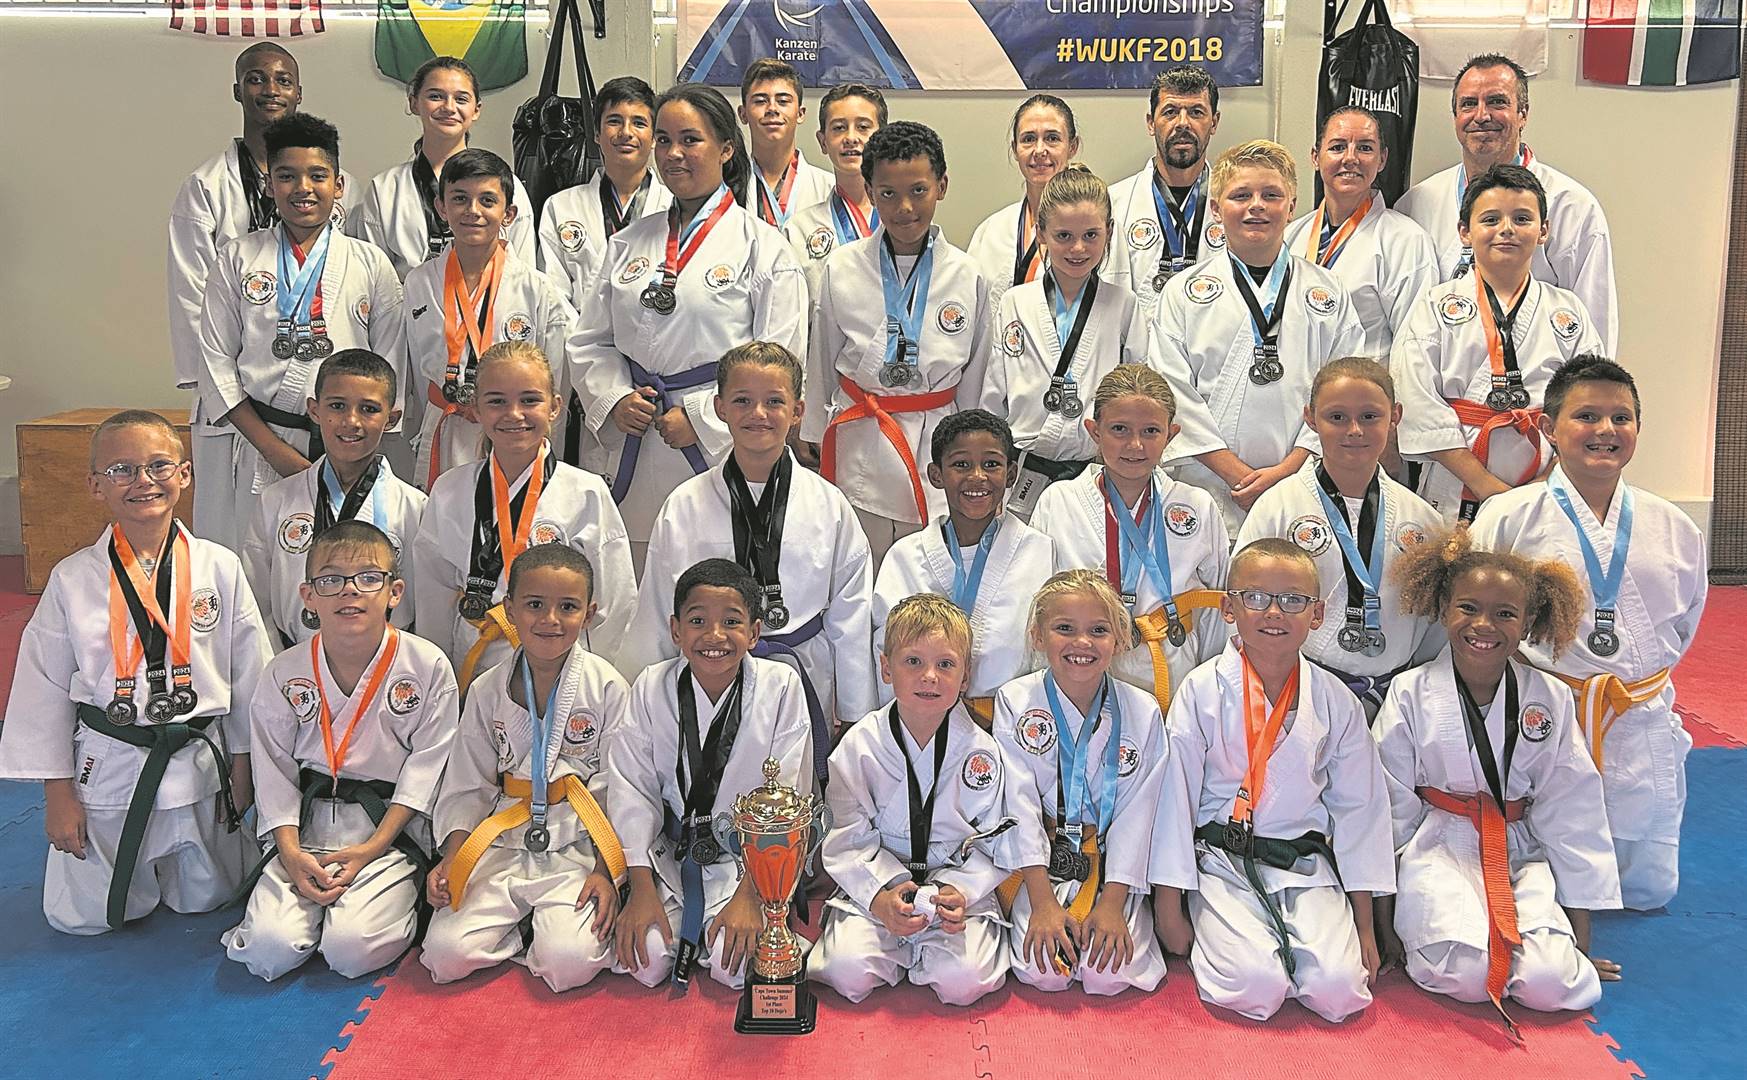 Some of the medal winners from Shotokan Karate Academy in Brackenfell.